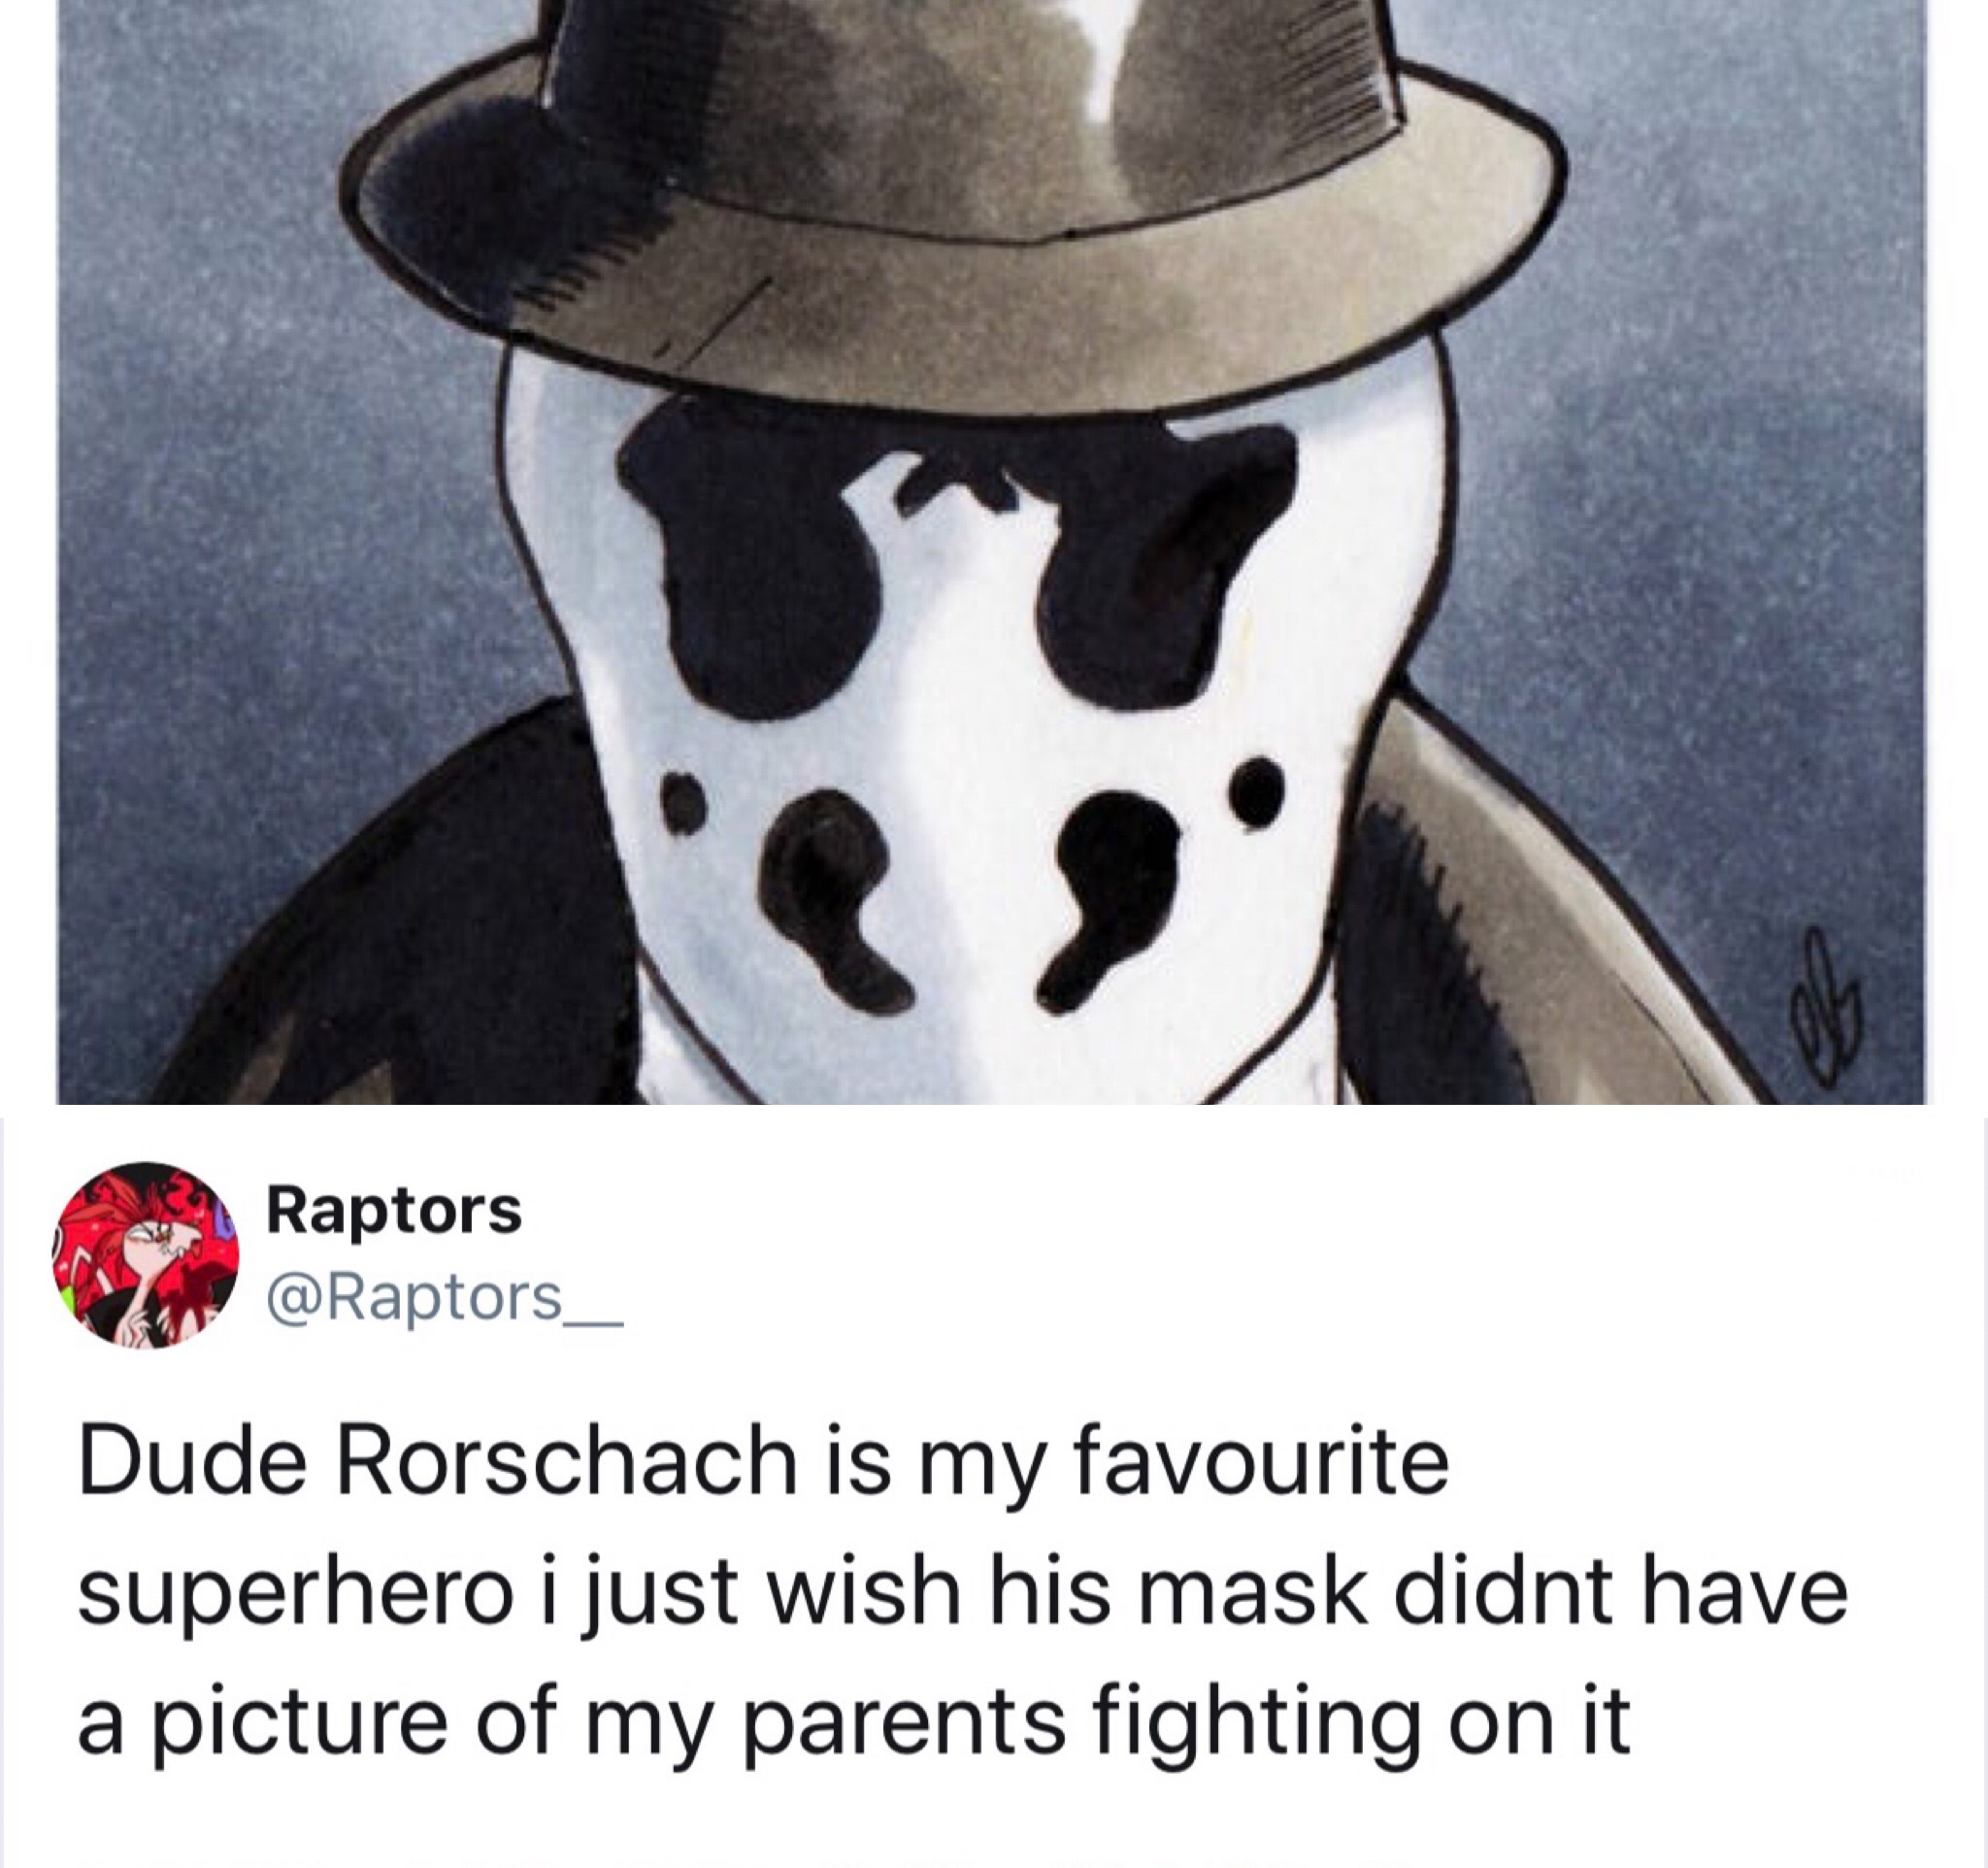 watchmen rorschach drawing face - Raptors Dude Rorschach is my favourite superhero i just wish his mask didnt have a picture of my parents fighting on it